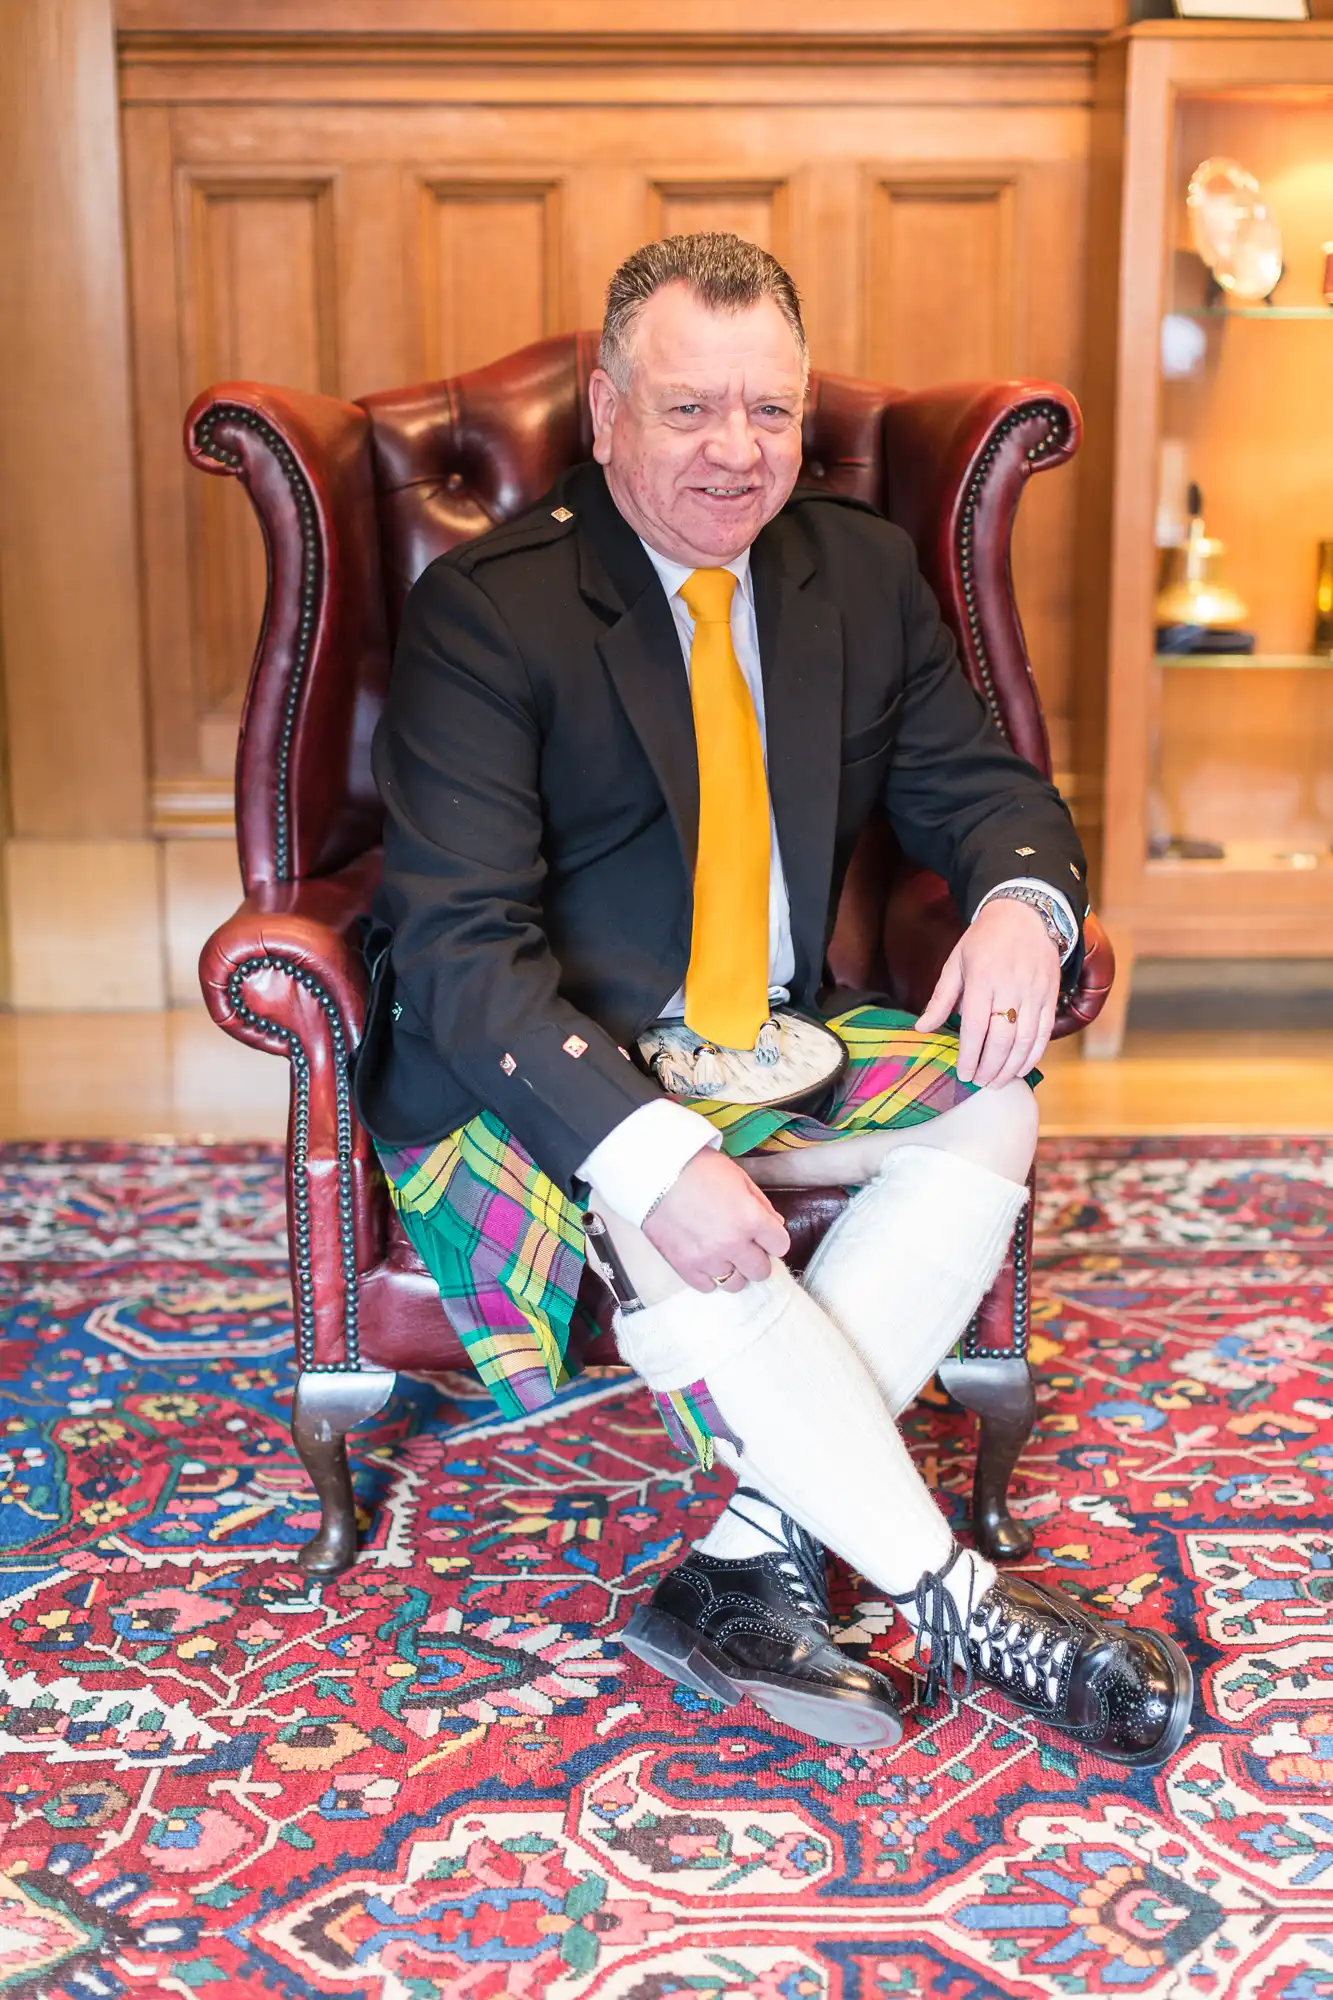 A man in a traditional scottish outfit, including a kilt and sporran, sits confidently in a leather chair against a richly patterned rug.